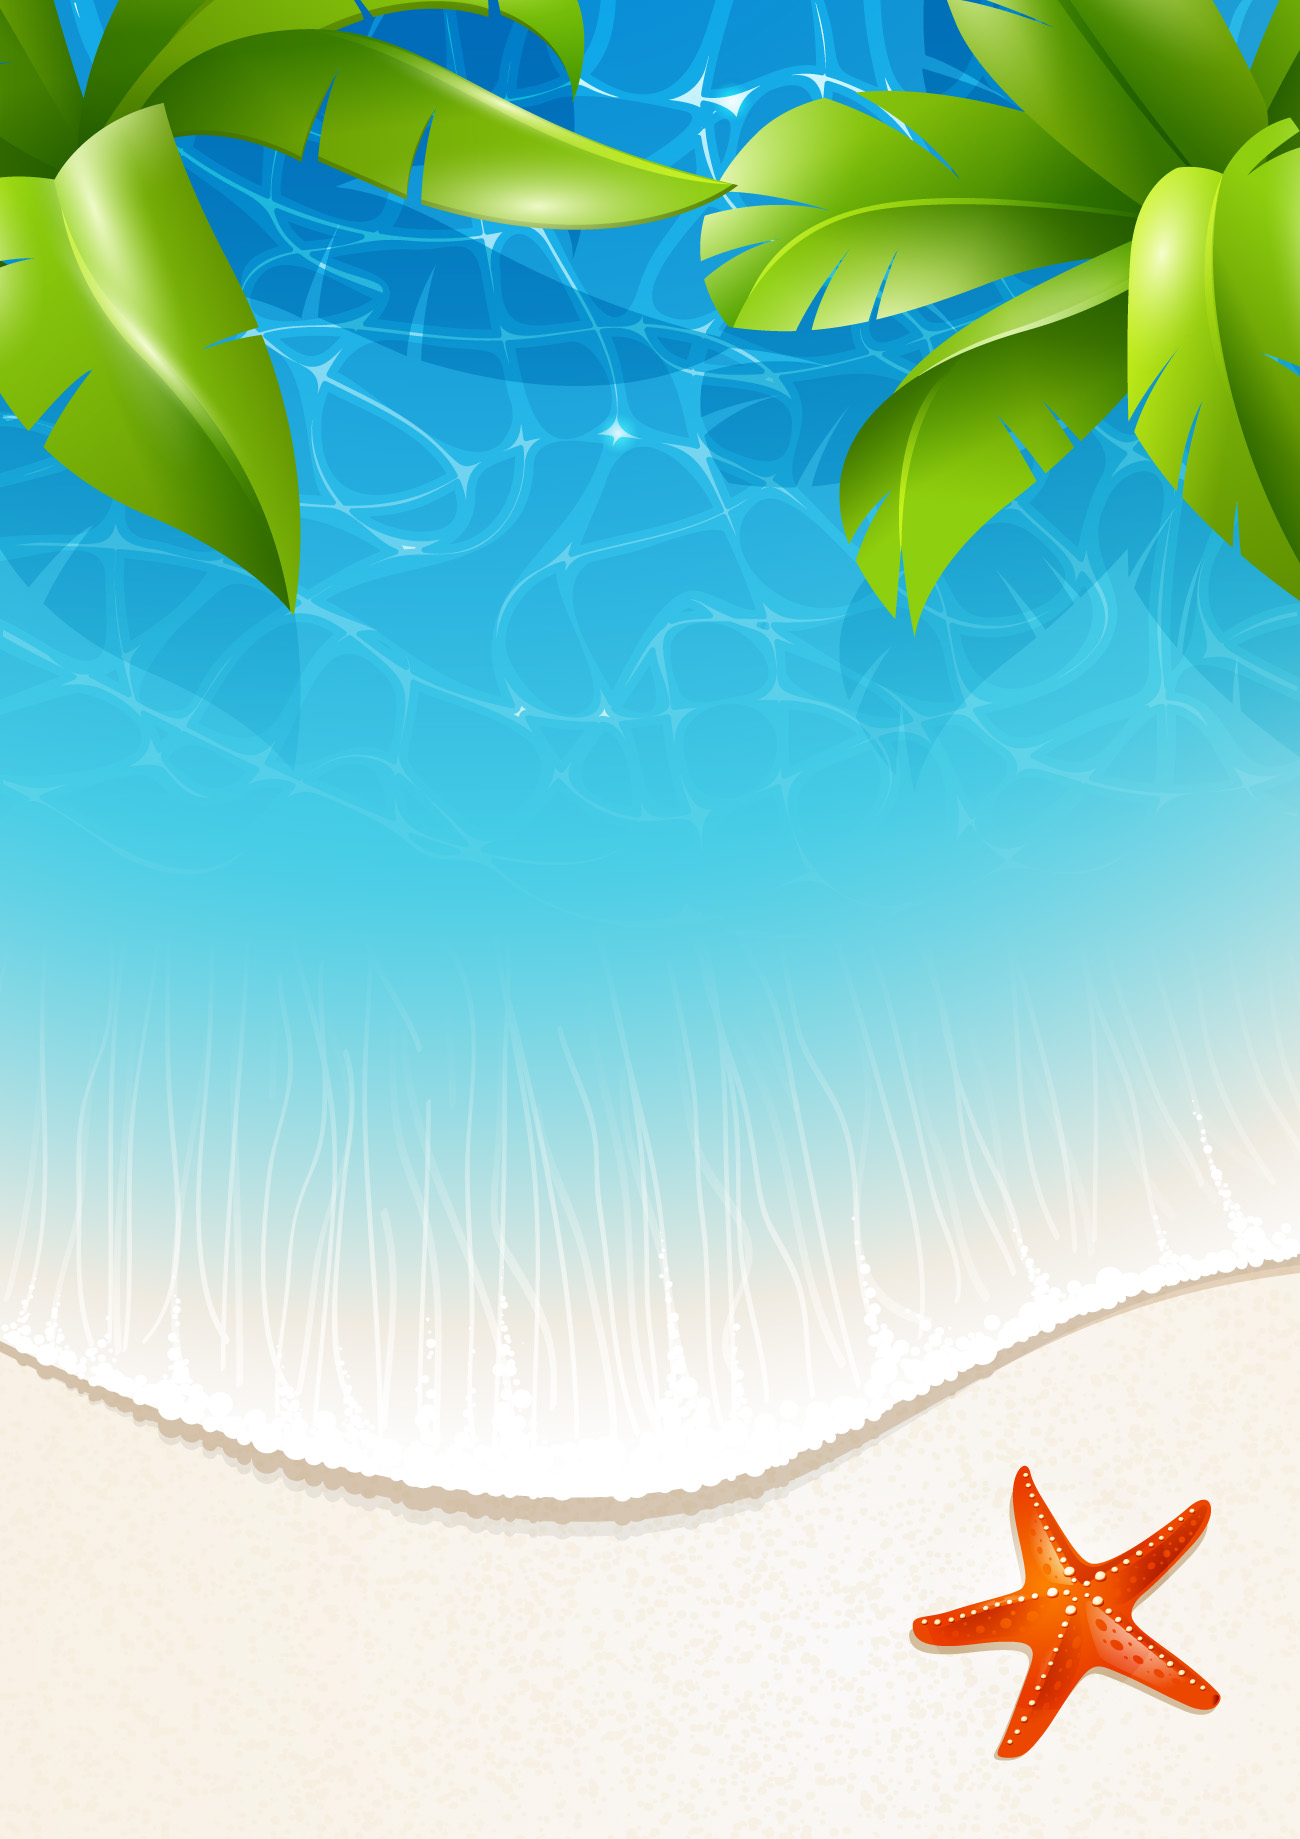 Beautiful Tropical Backgrounds vector 03 tropical beautiful backgrounds background   